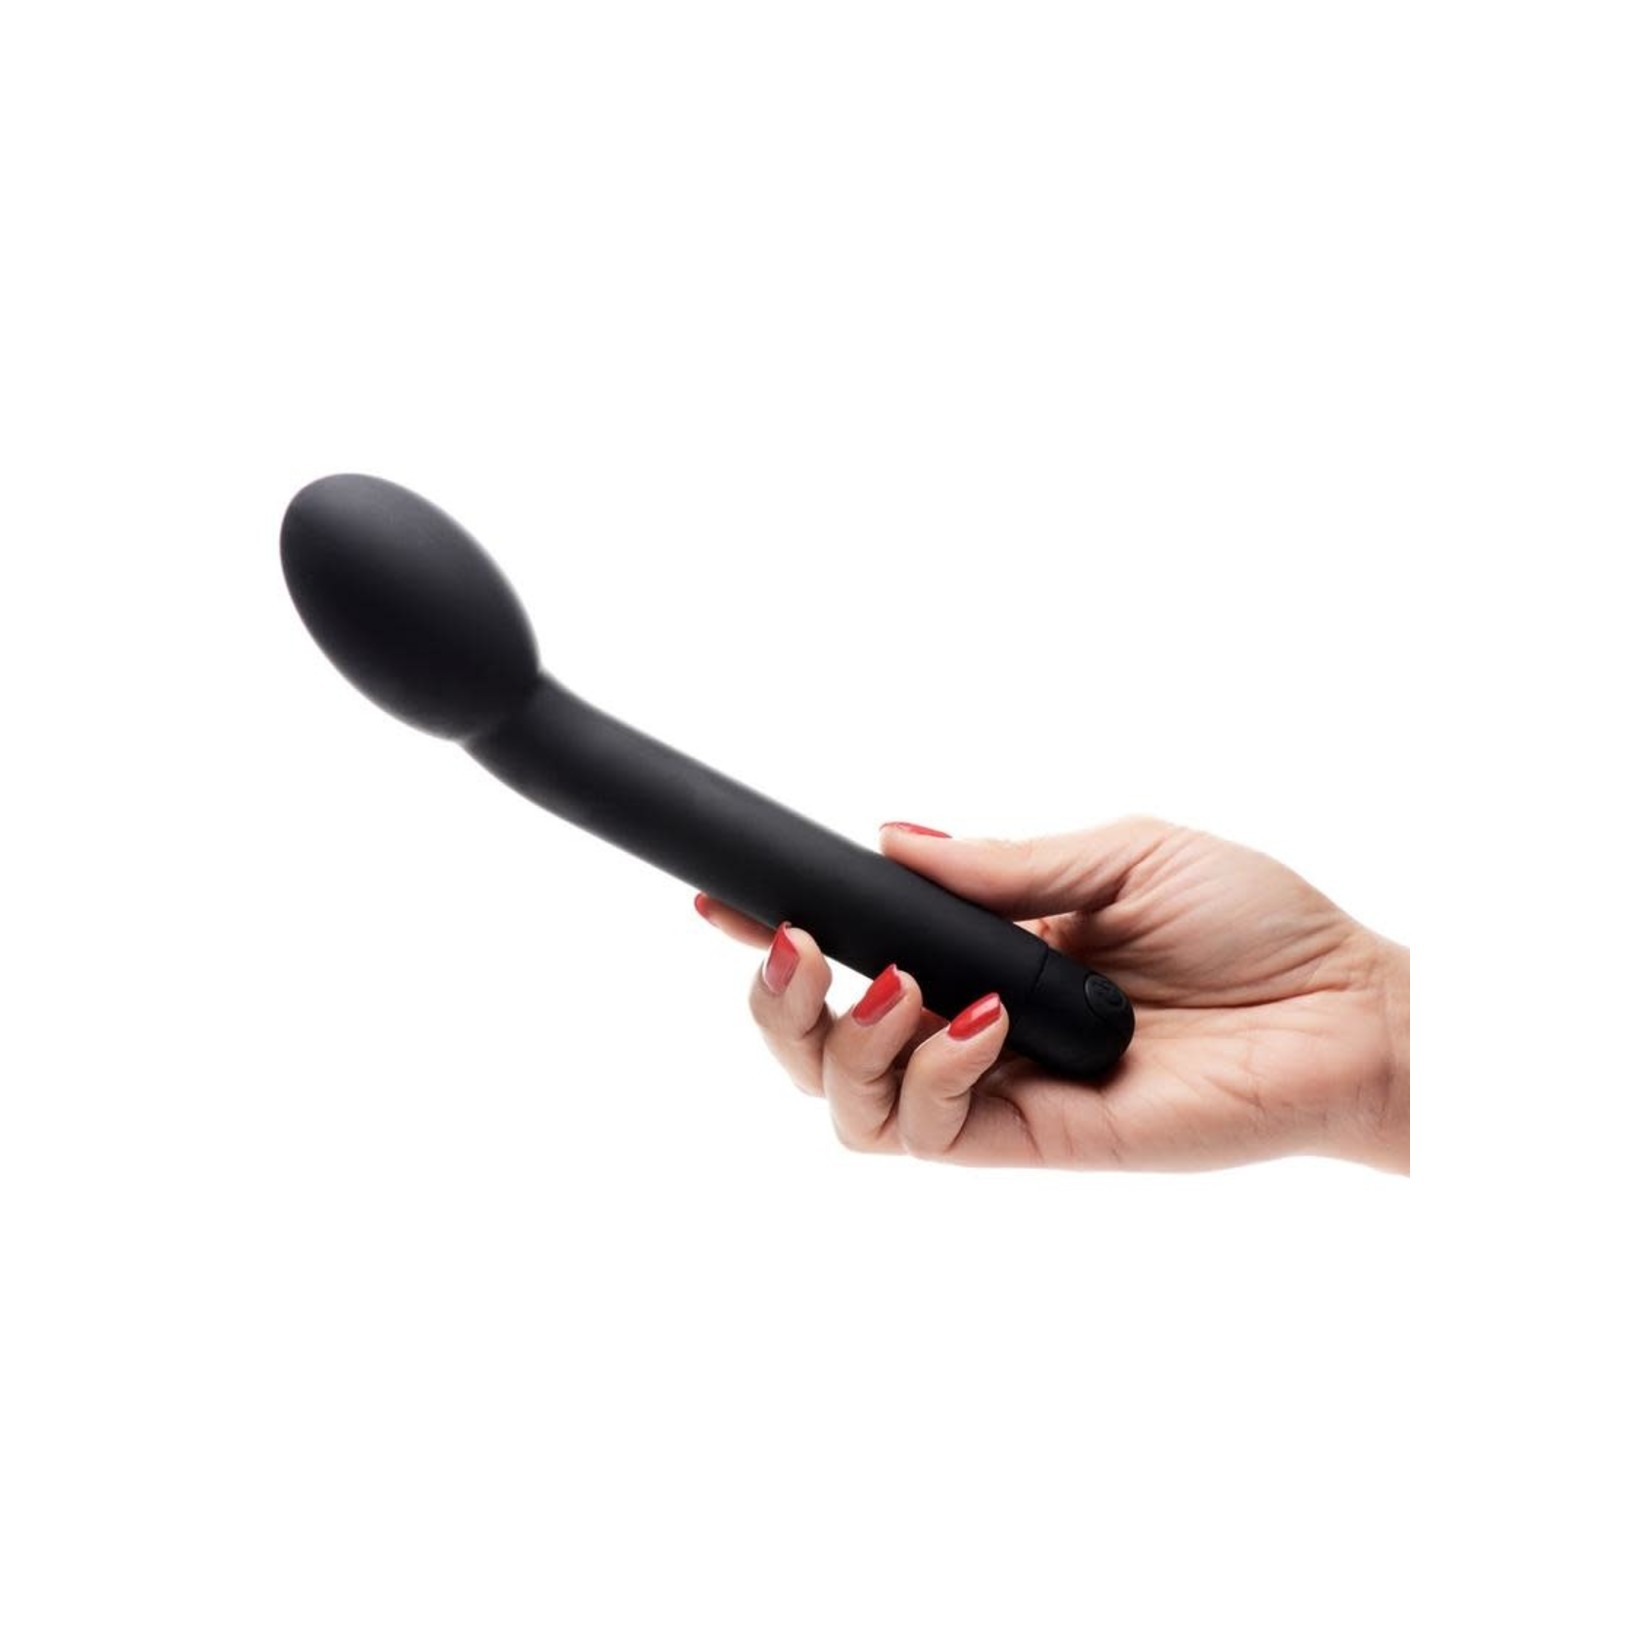 Bang! 10X Rechargeable Silicone G-Spot Vibrator - Black